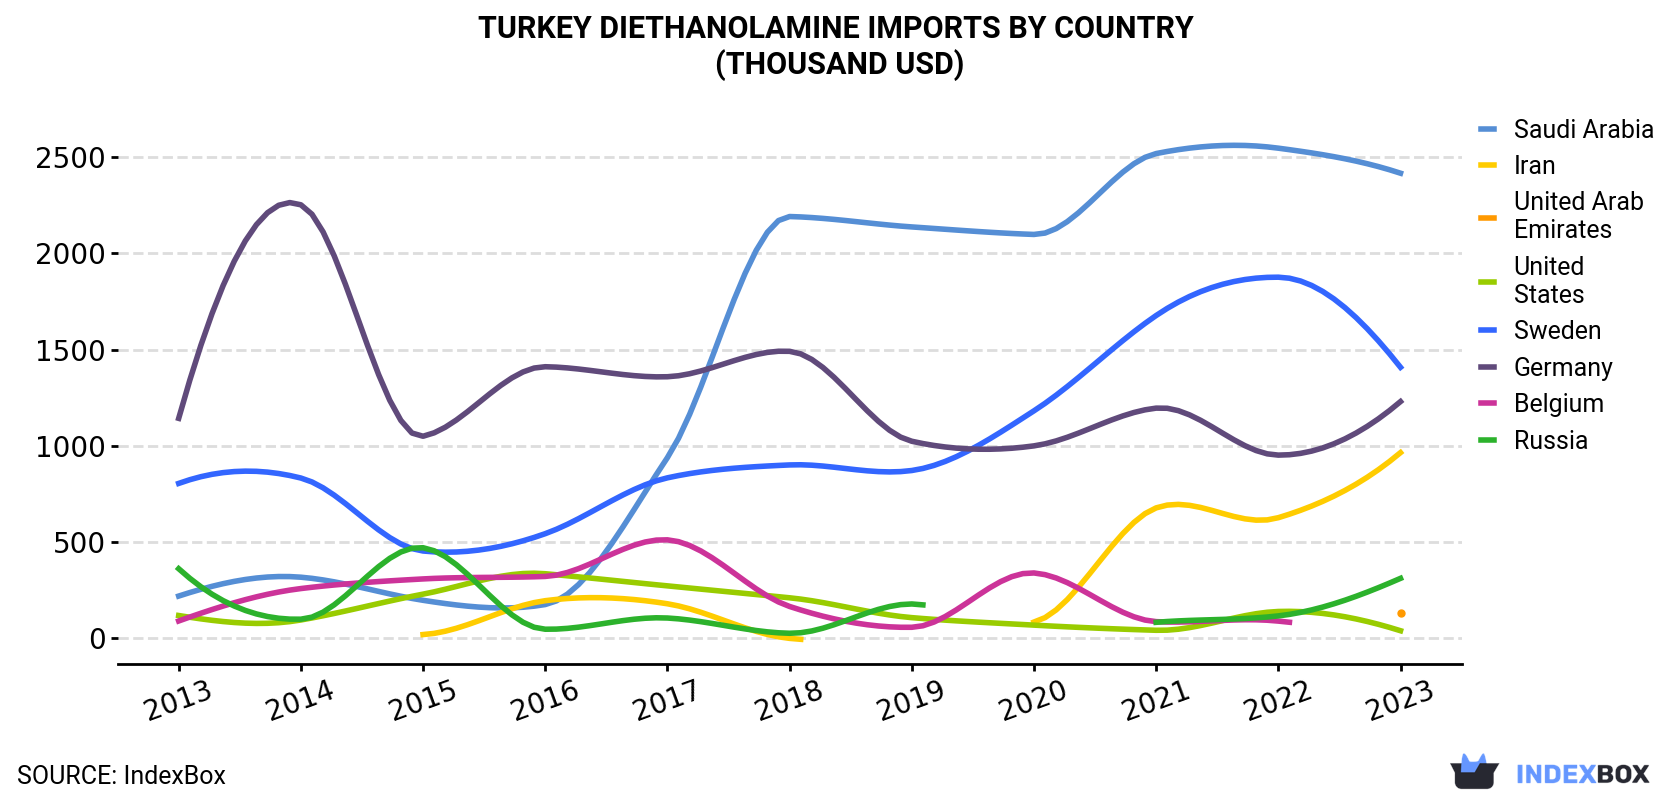 Turkey Diethanolamine Imports By Country (Thousand USD)